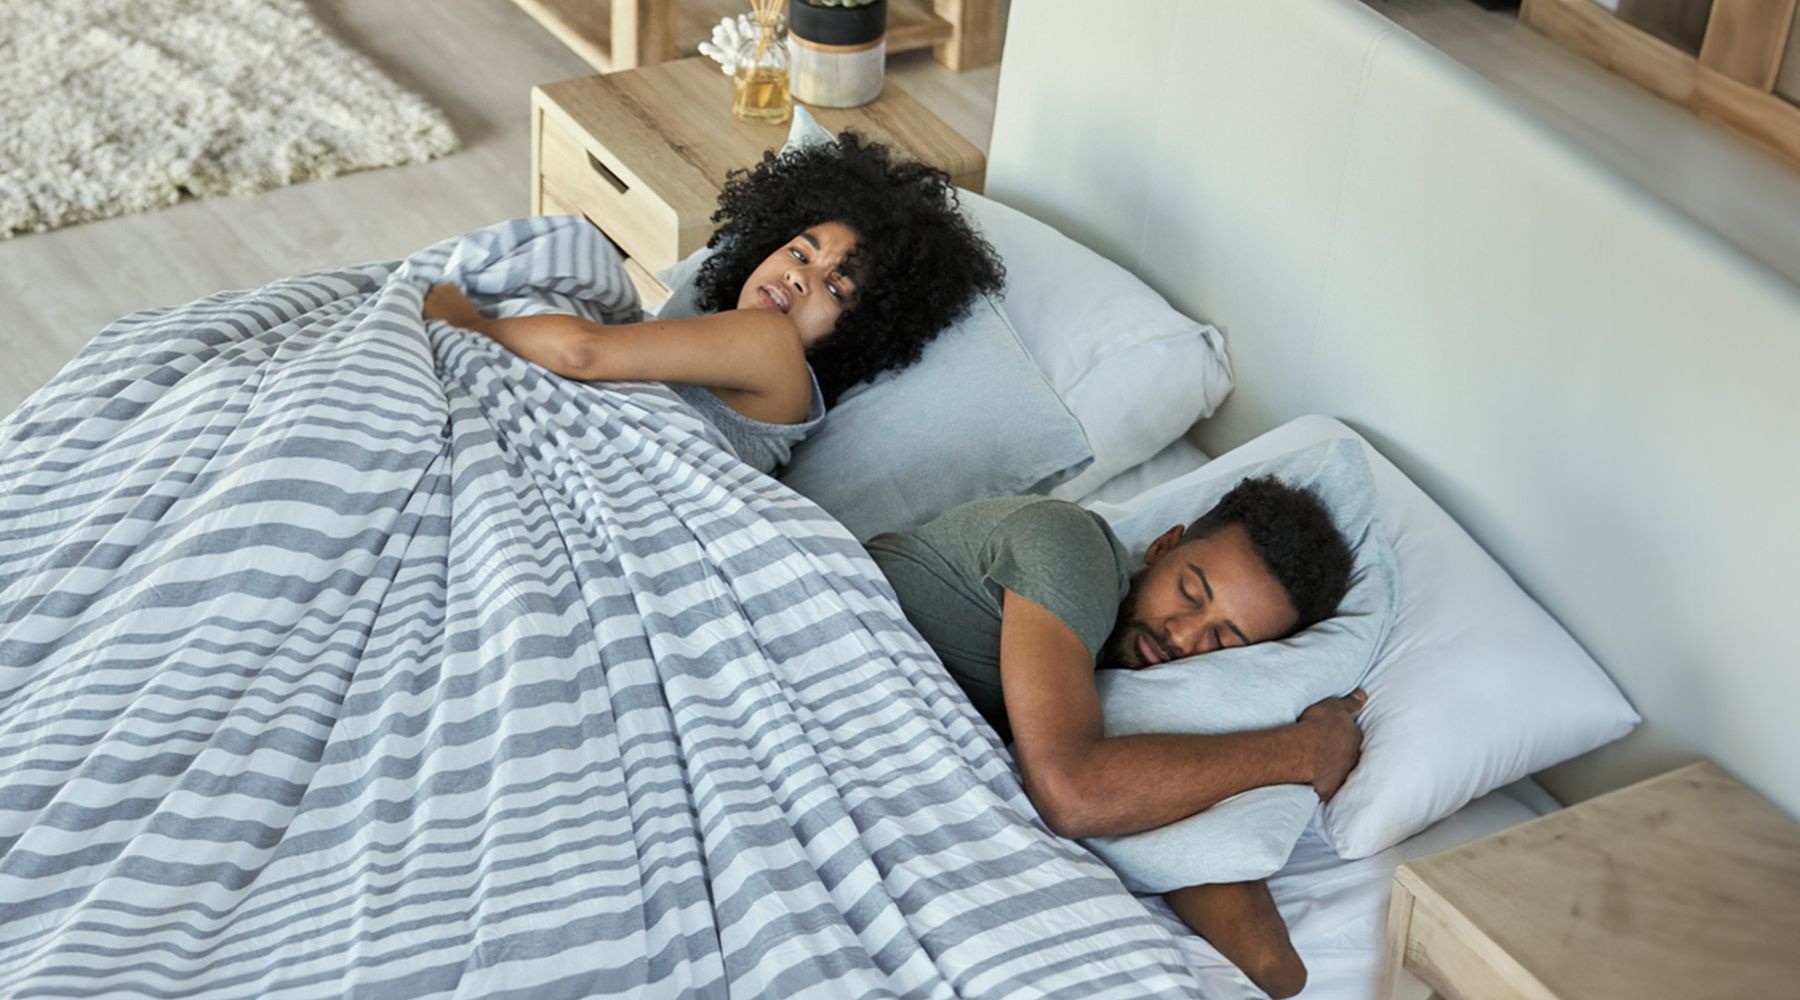 To Cuddle Or Not To Cuddle In Bed? - Bed Advice UK